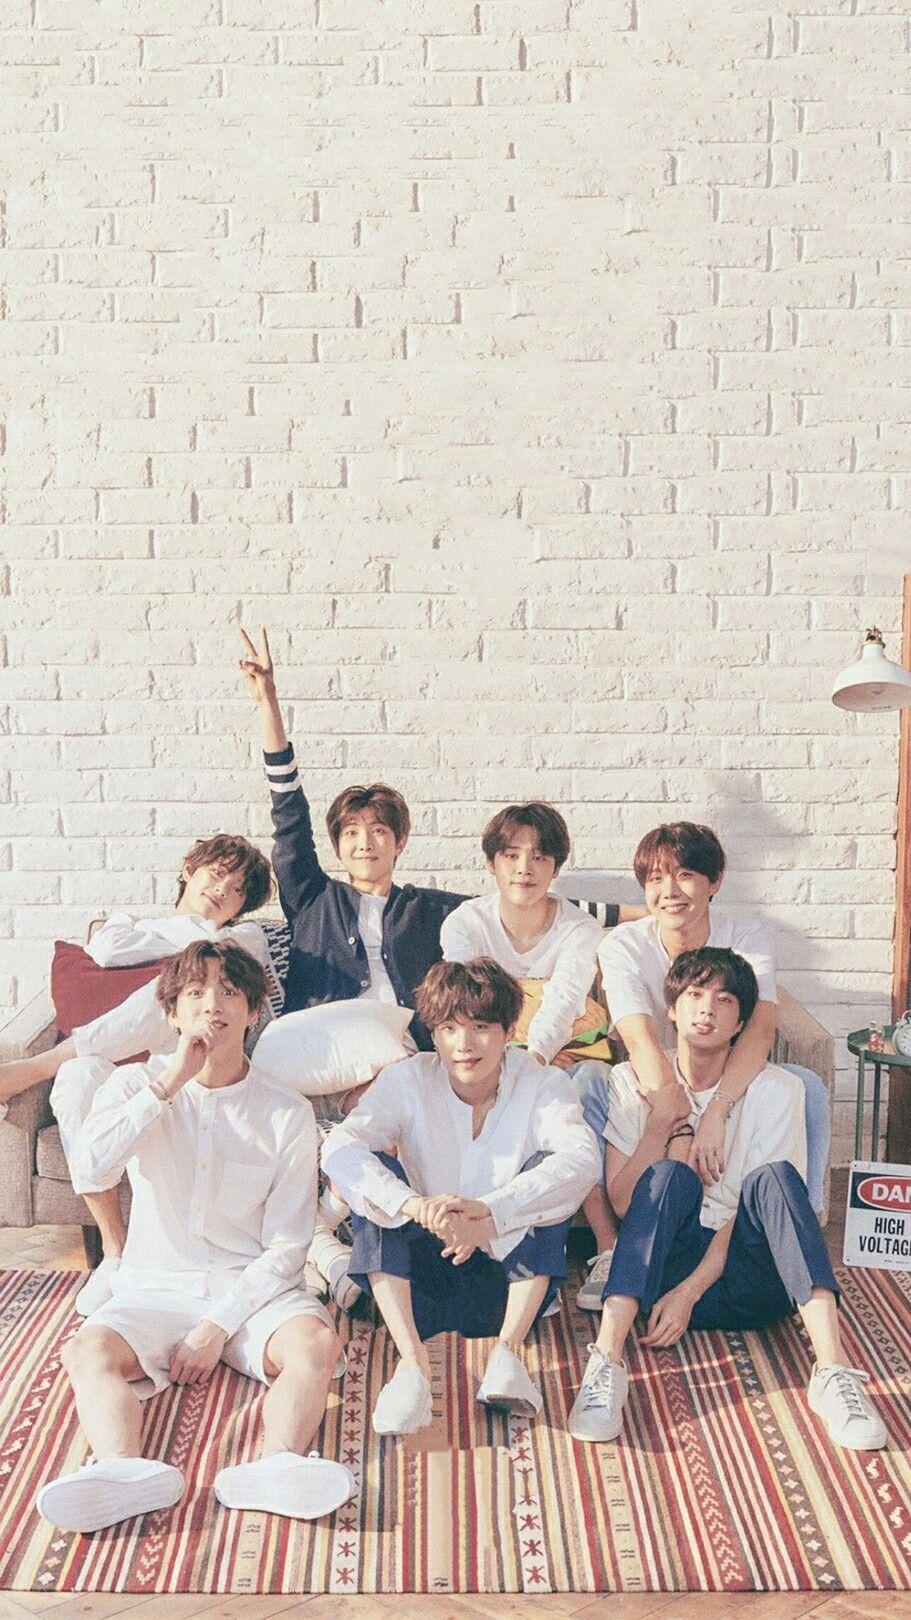 Download BTS Wallpapers 2020 Free for Android - BTS Wallpapers 2020 APK  Download - STEPrimo.com